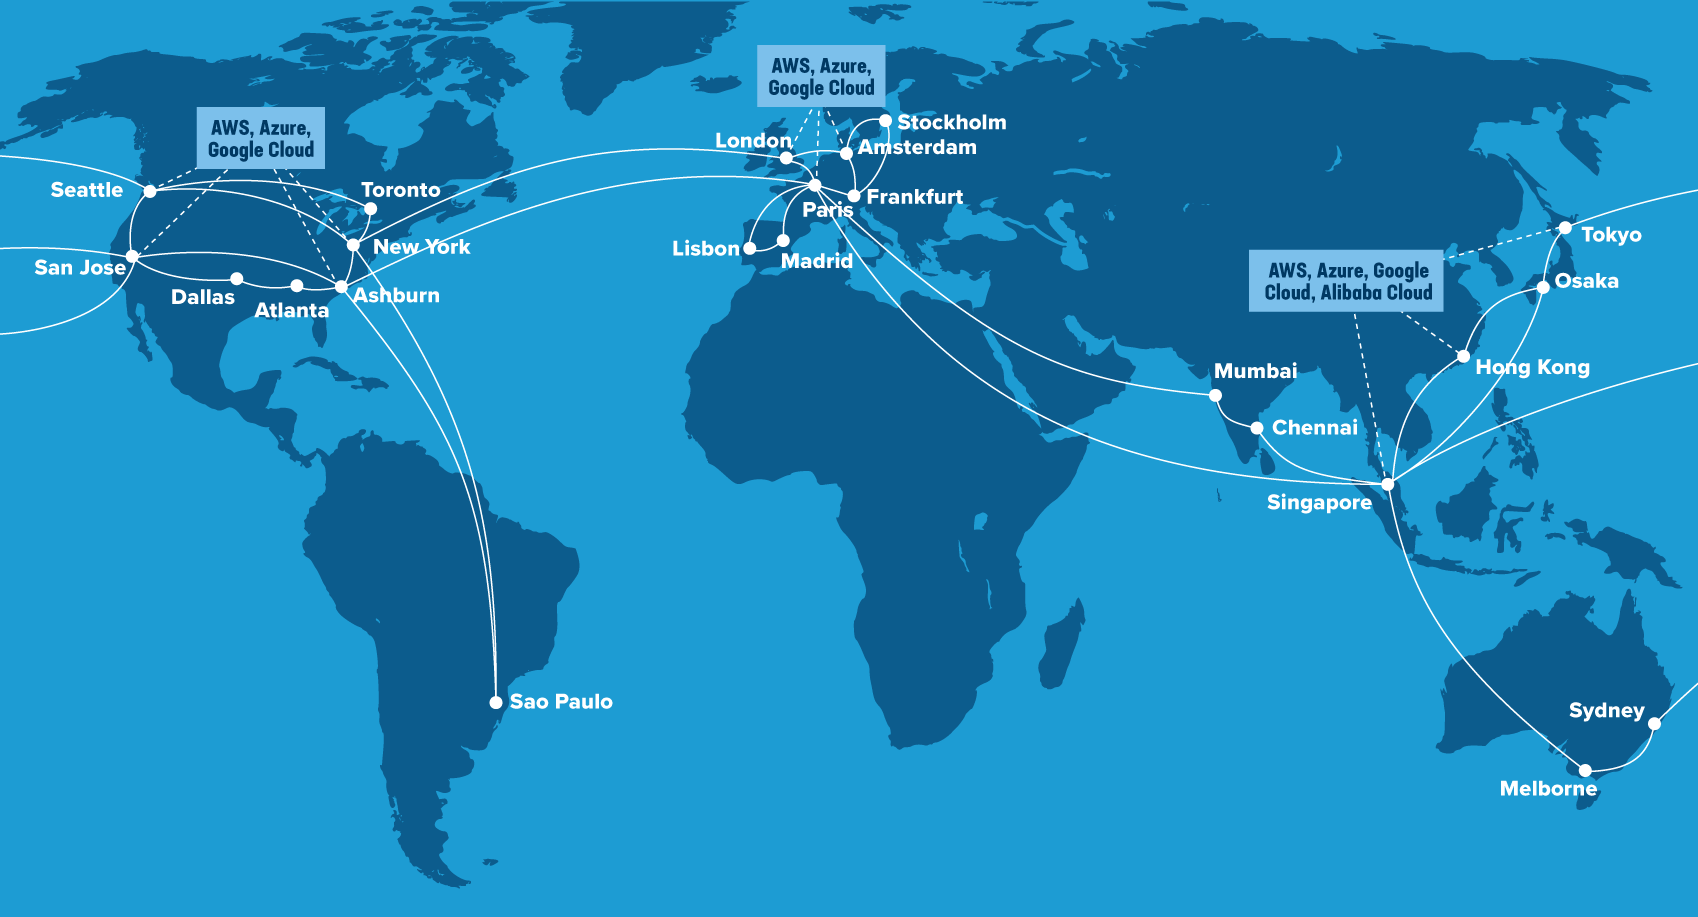 Map of the F5 Global Network